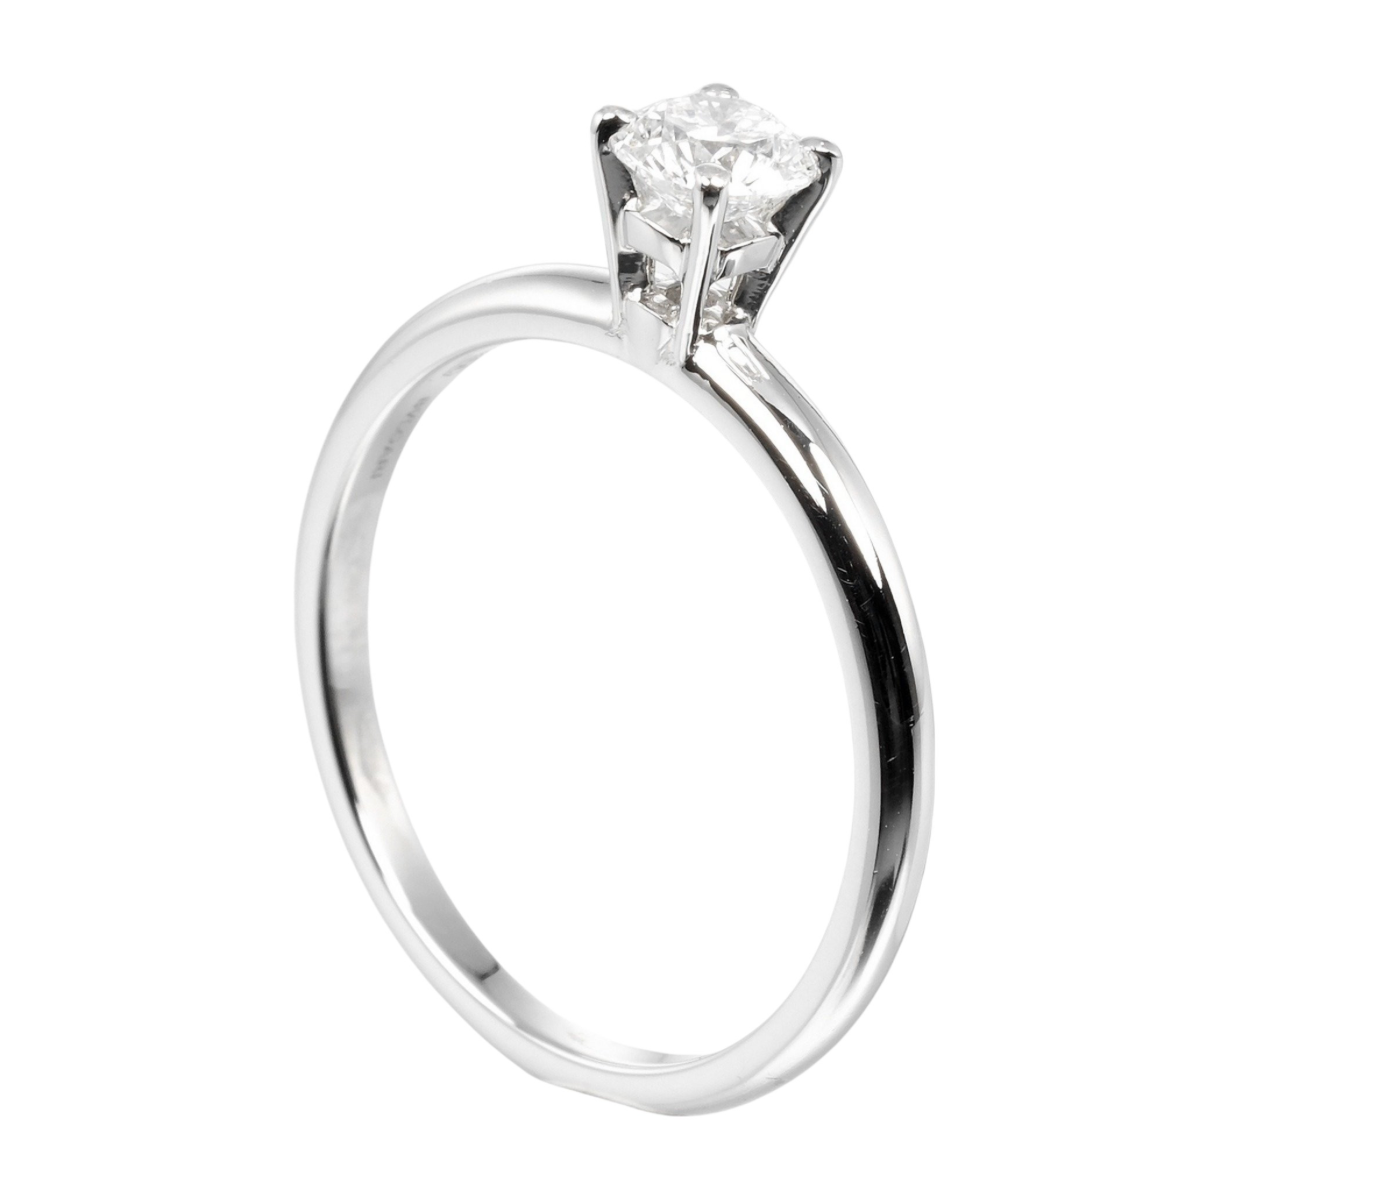 Pre-owned platinum Bvlgari Roma Amor ring with a 0.32ct diamond of IF clarity